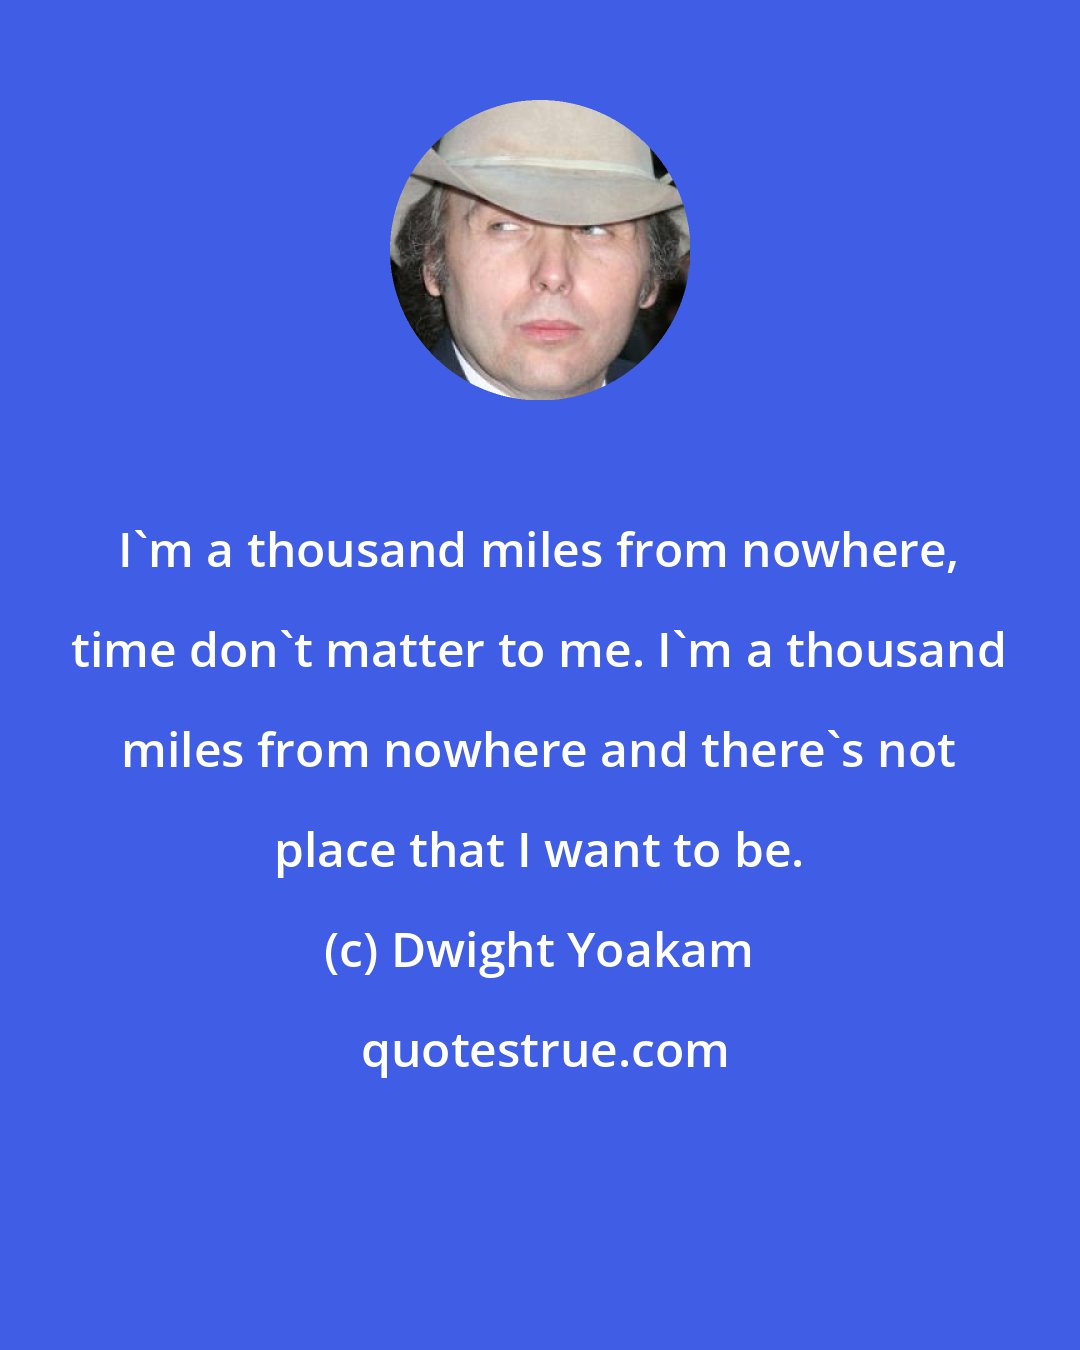 Dwight Yoakam: I'm a thousand miles from nowhere, time don't matter to me. I'm a thousand miles from nowhere and there's not place that I want to be.